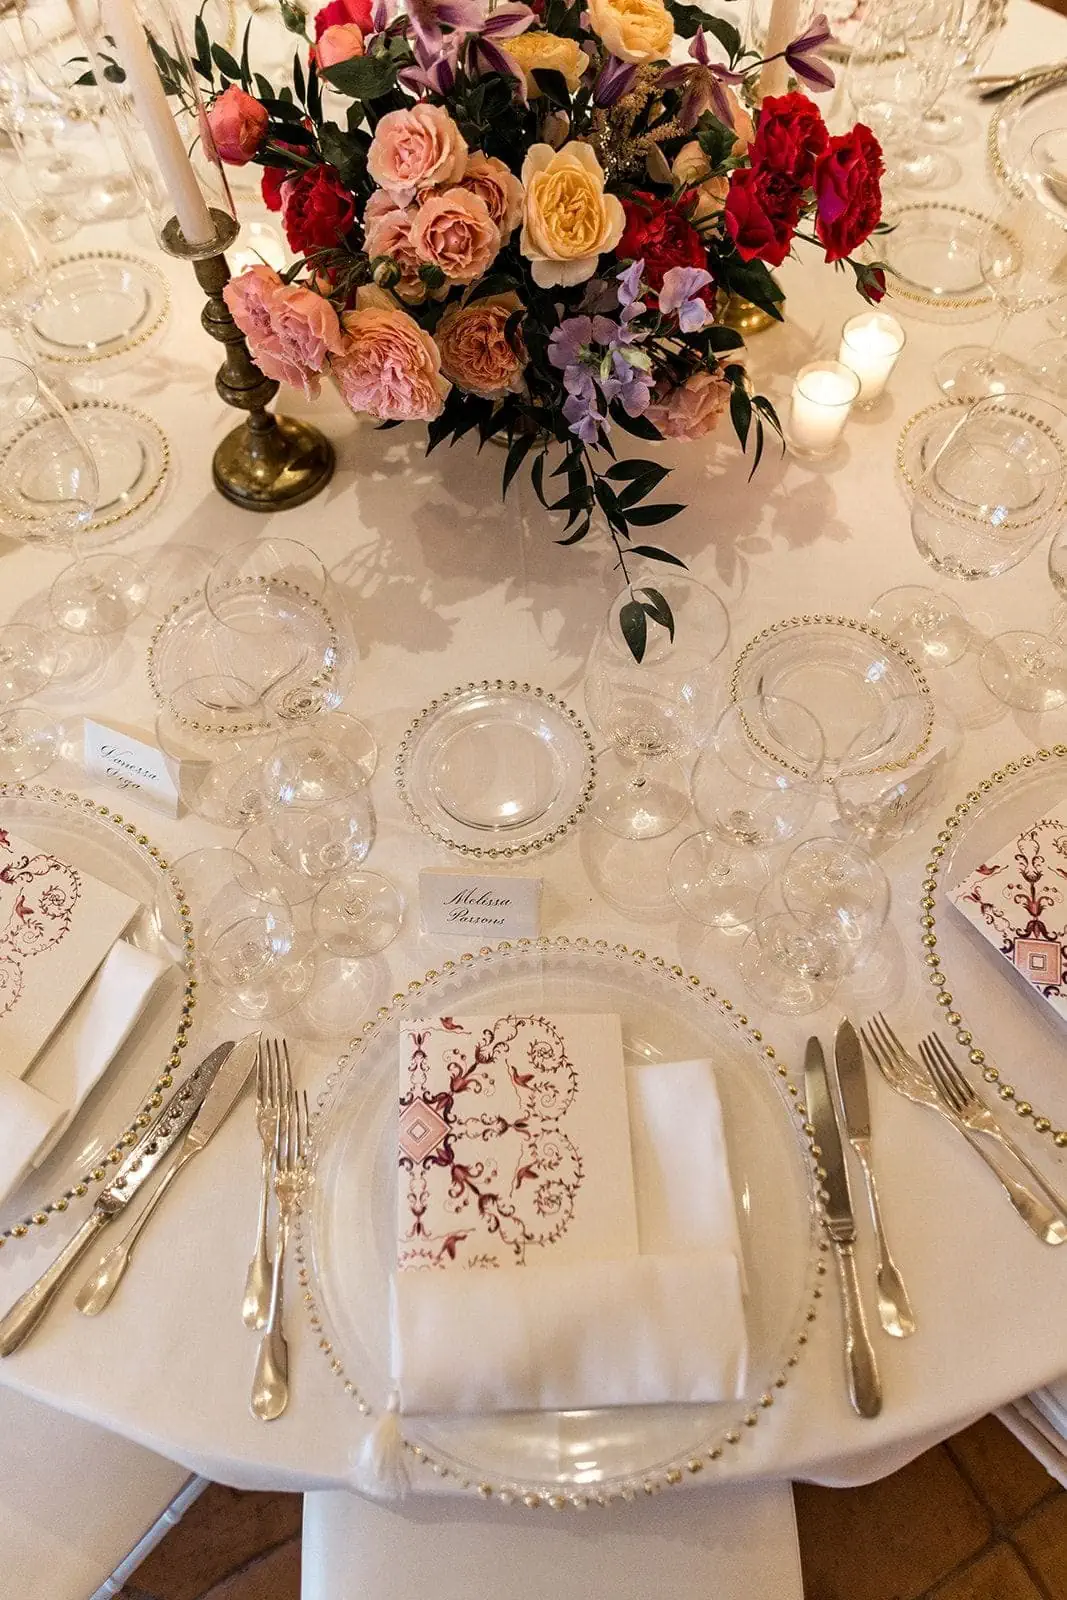 Wedding reception table setting at Belmond Caruso Hotel